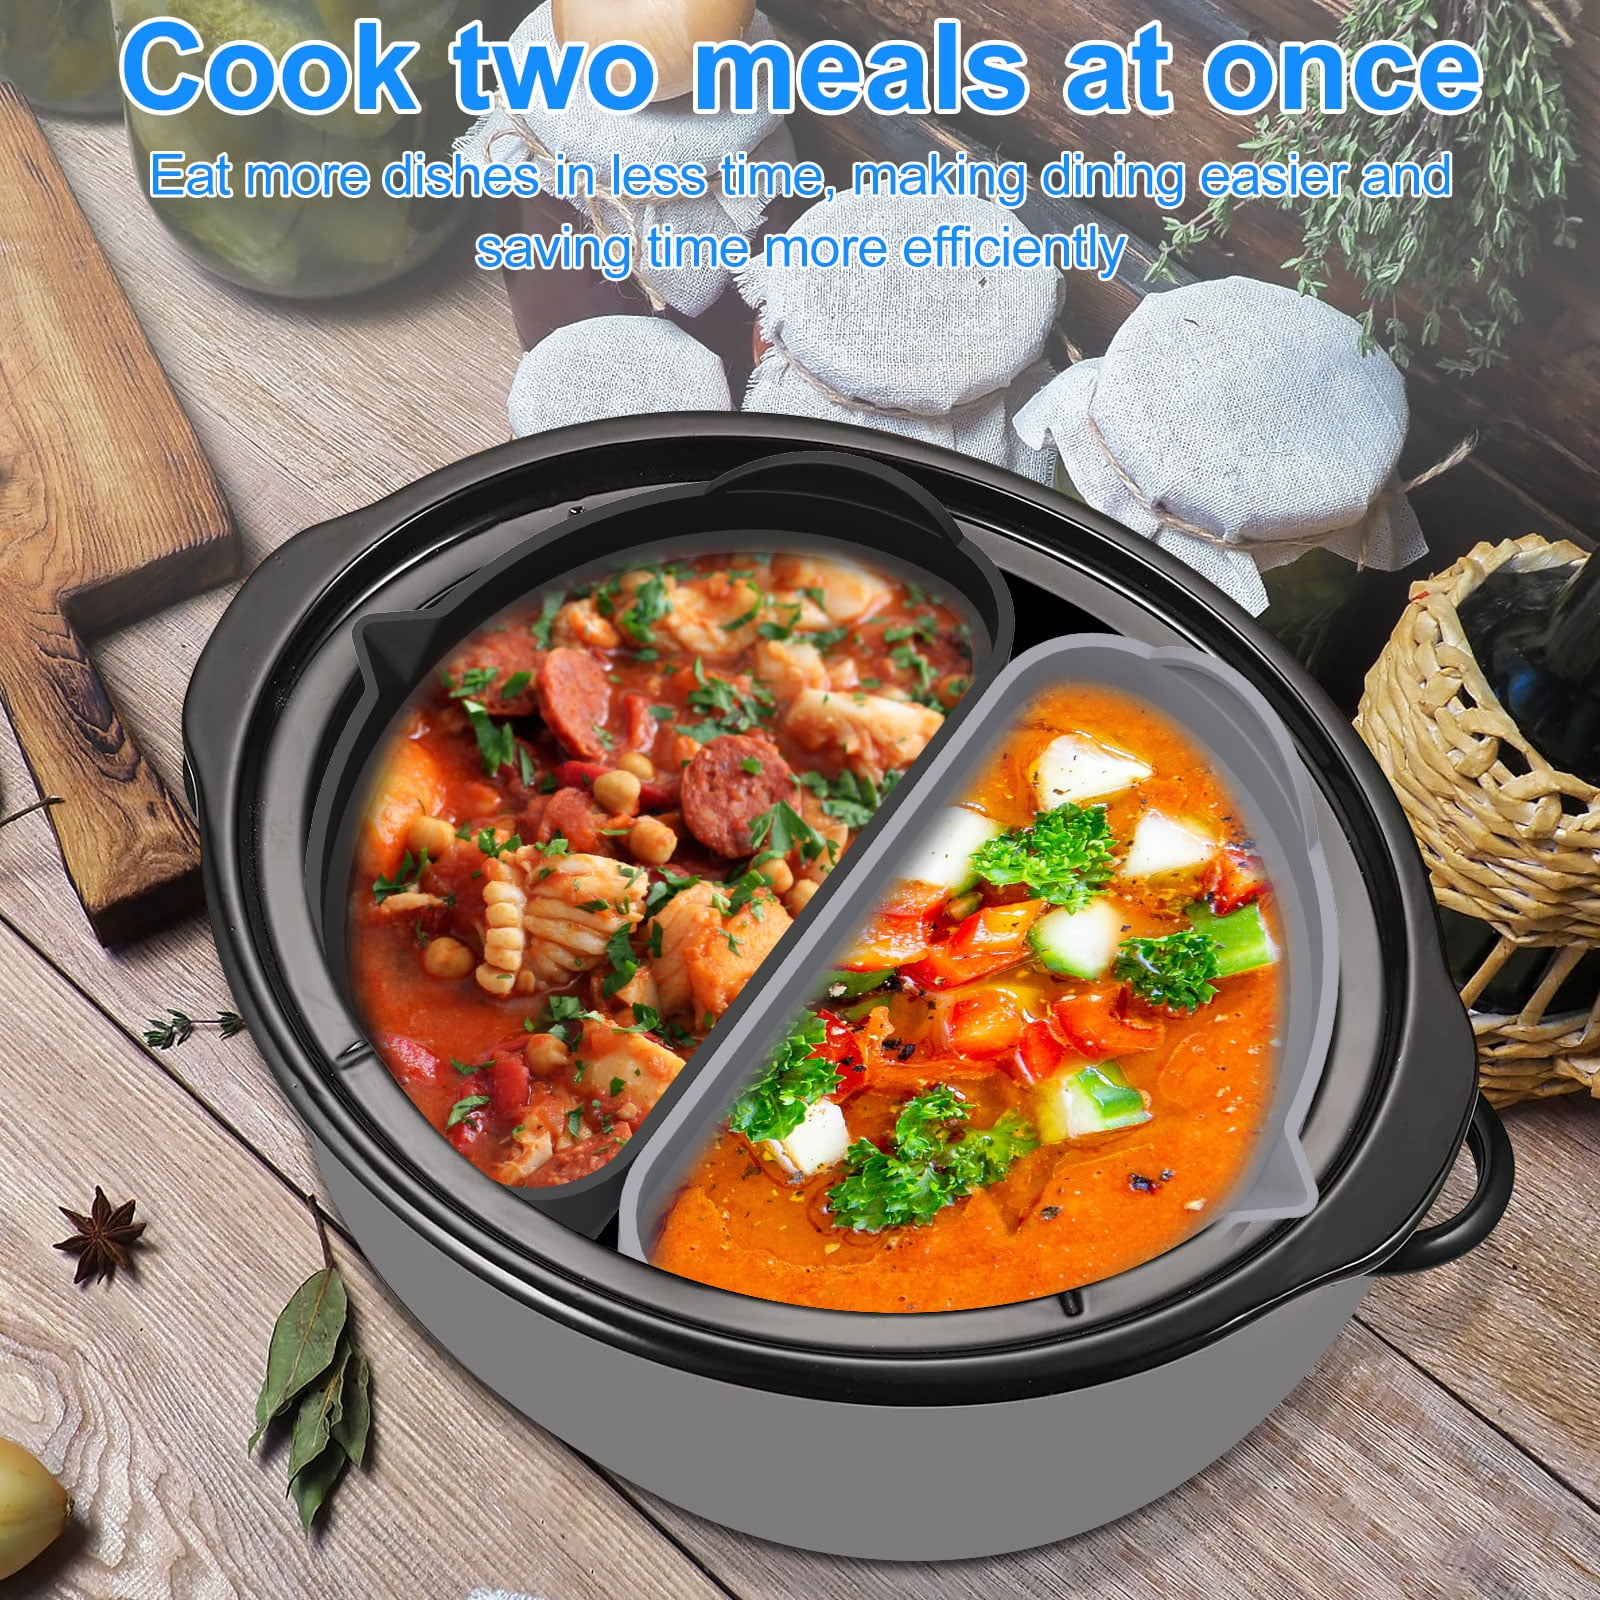 Slow Cooker Divider Silicone Liners, 6 Qt Crockpot and Slow Cookers  Compatible, Cook Two Dishes At Once - Easy Cleanup Dishwasher, BPA Free 6  Quart